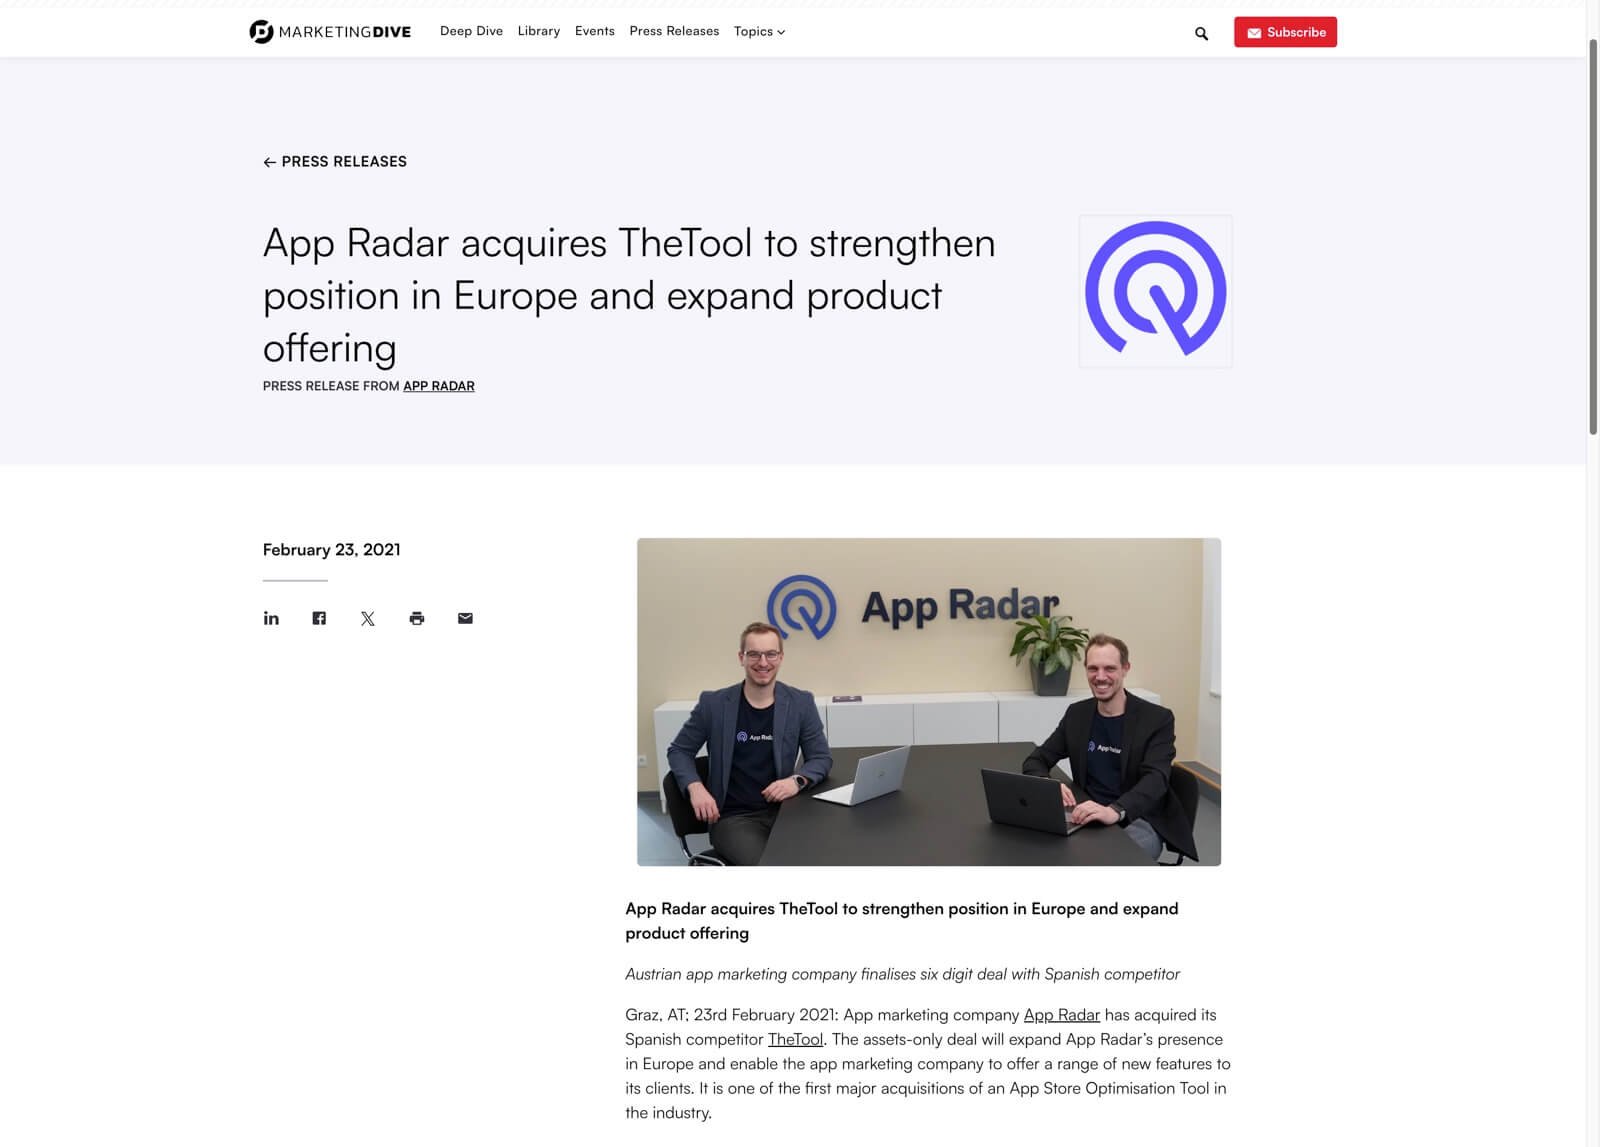 Marketing-Dive-App-Radar-acquires-TheTool-to-strengthen-position-in-Europe-and-expand-product-offering-Marketing-Dive.jpg